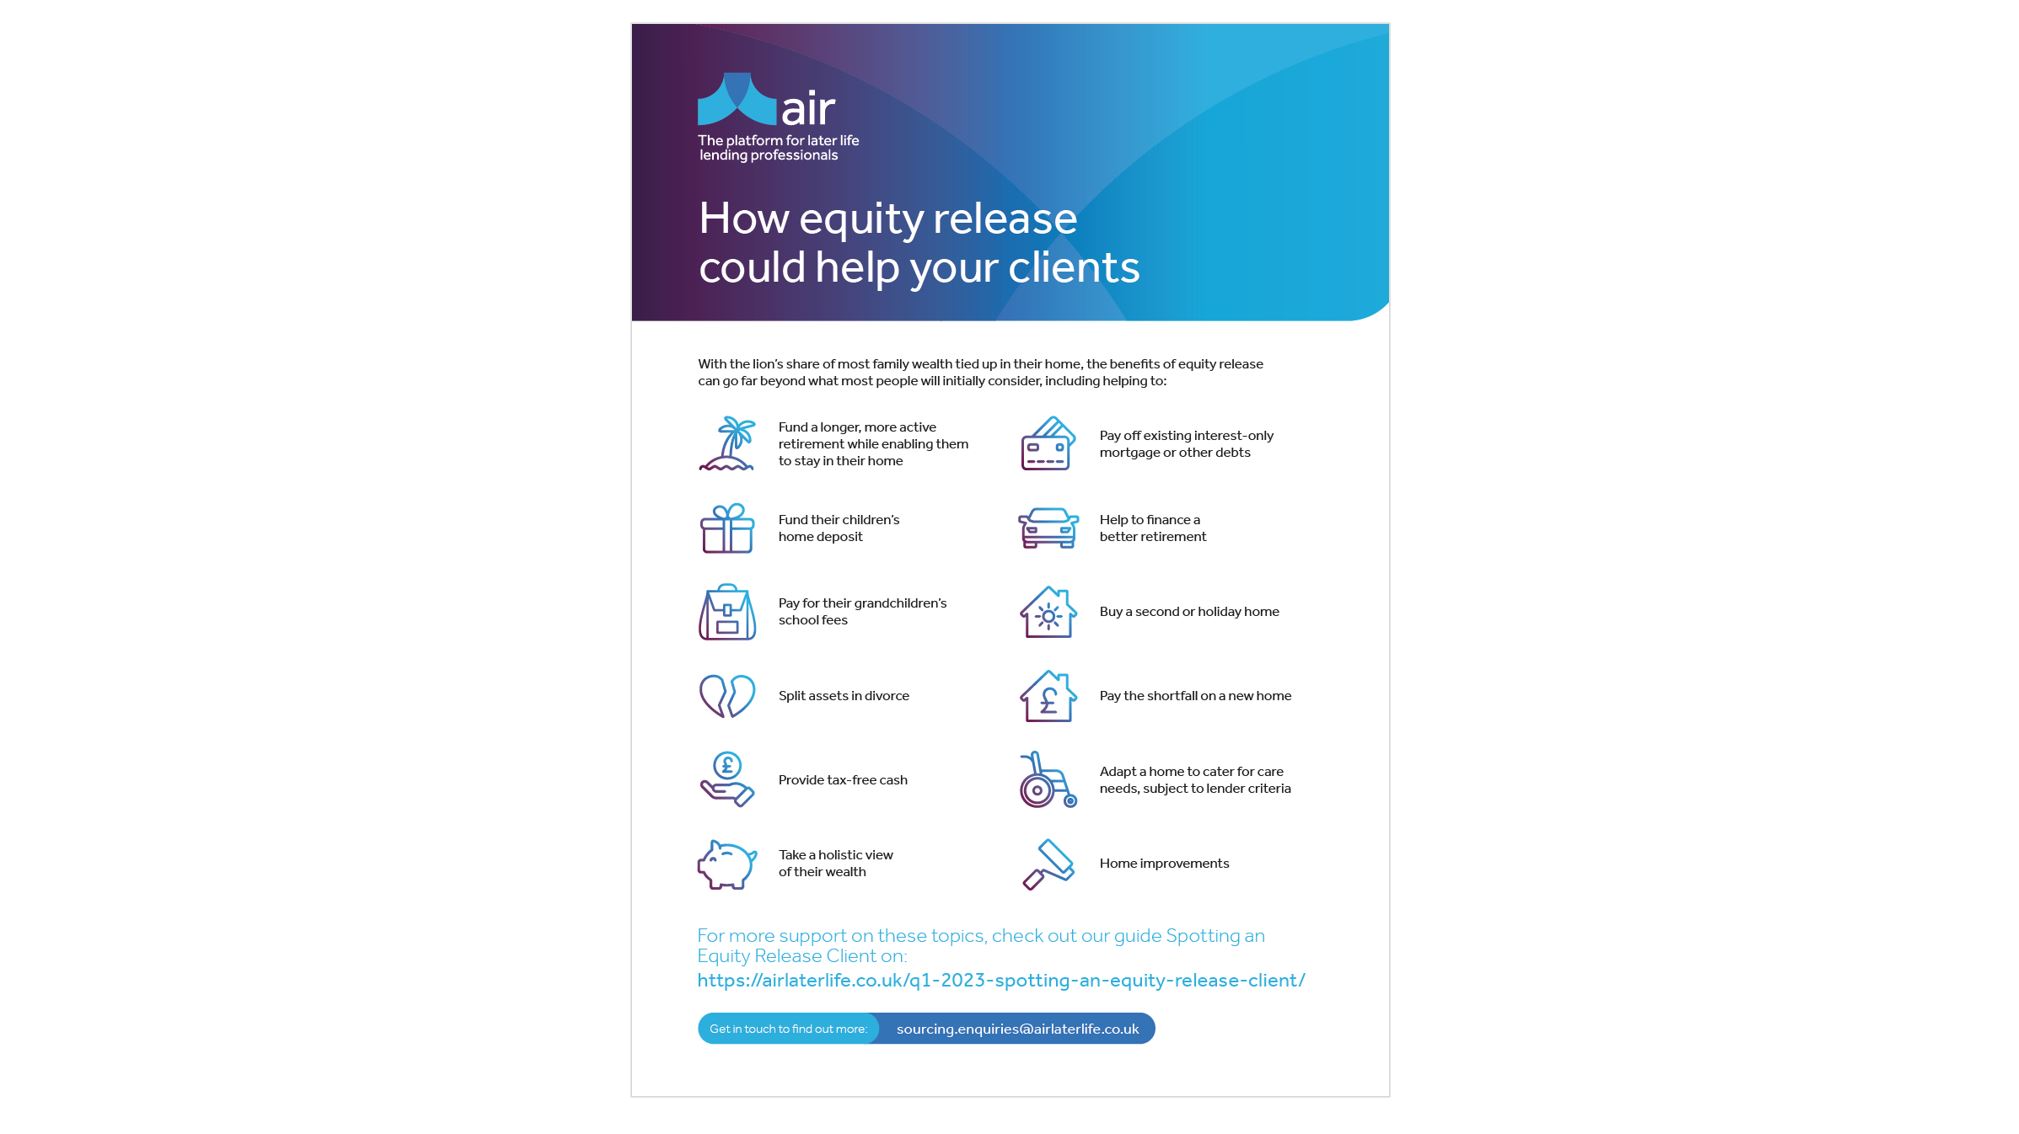 How equity release could help your clients